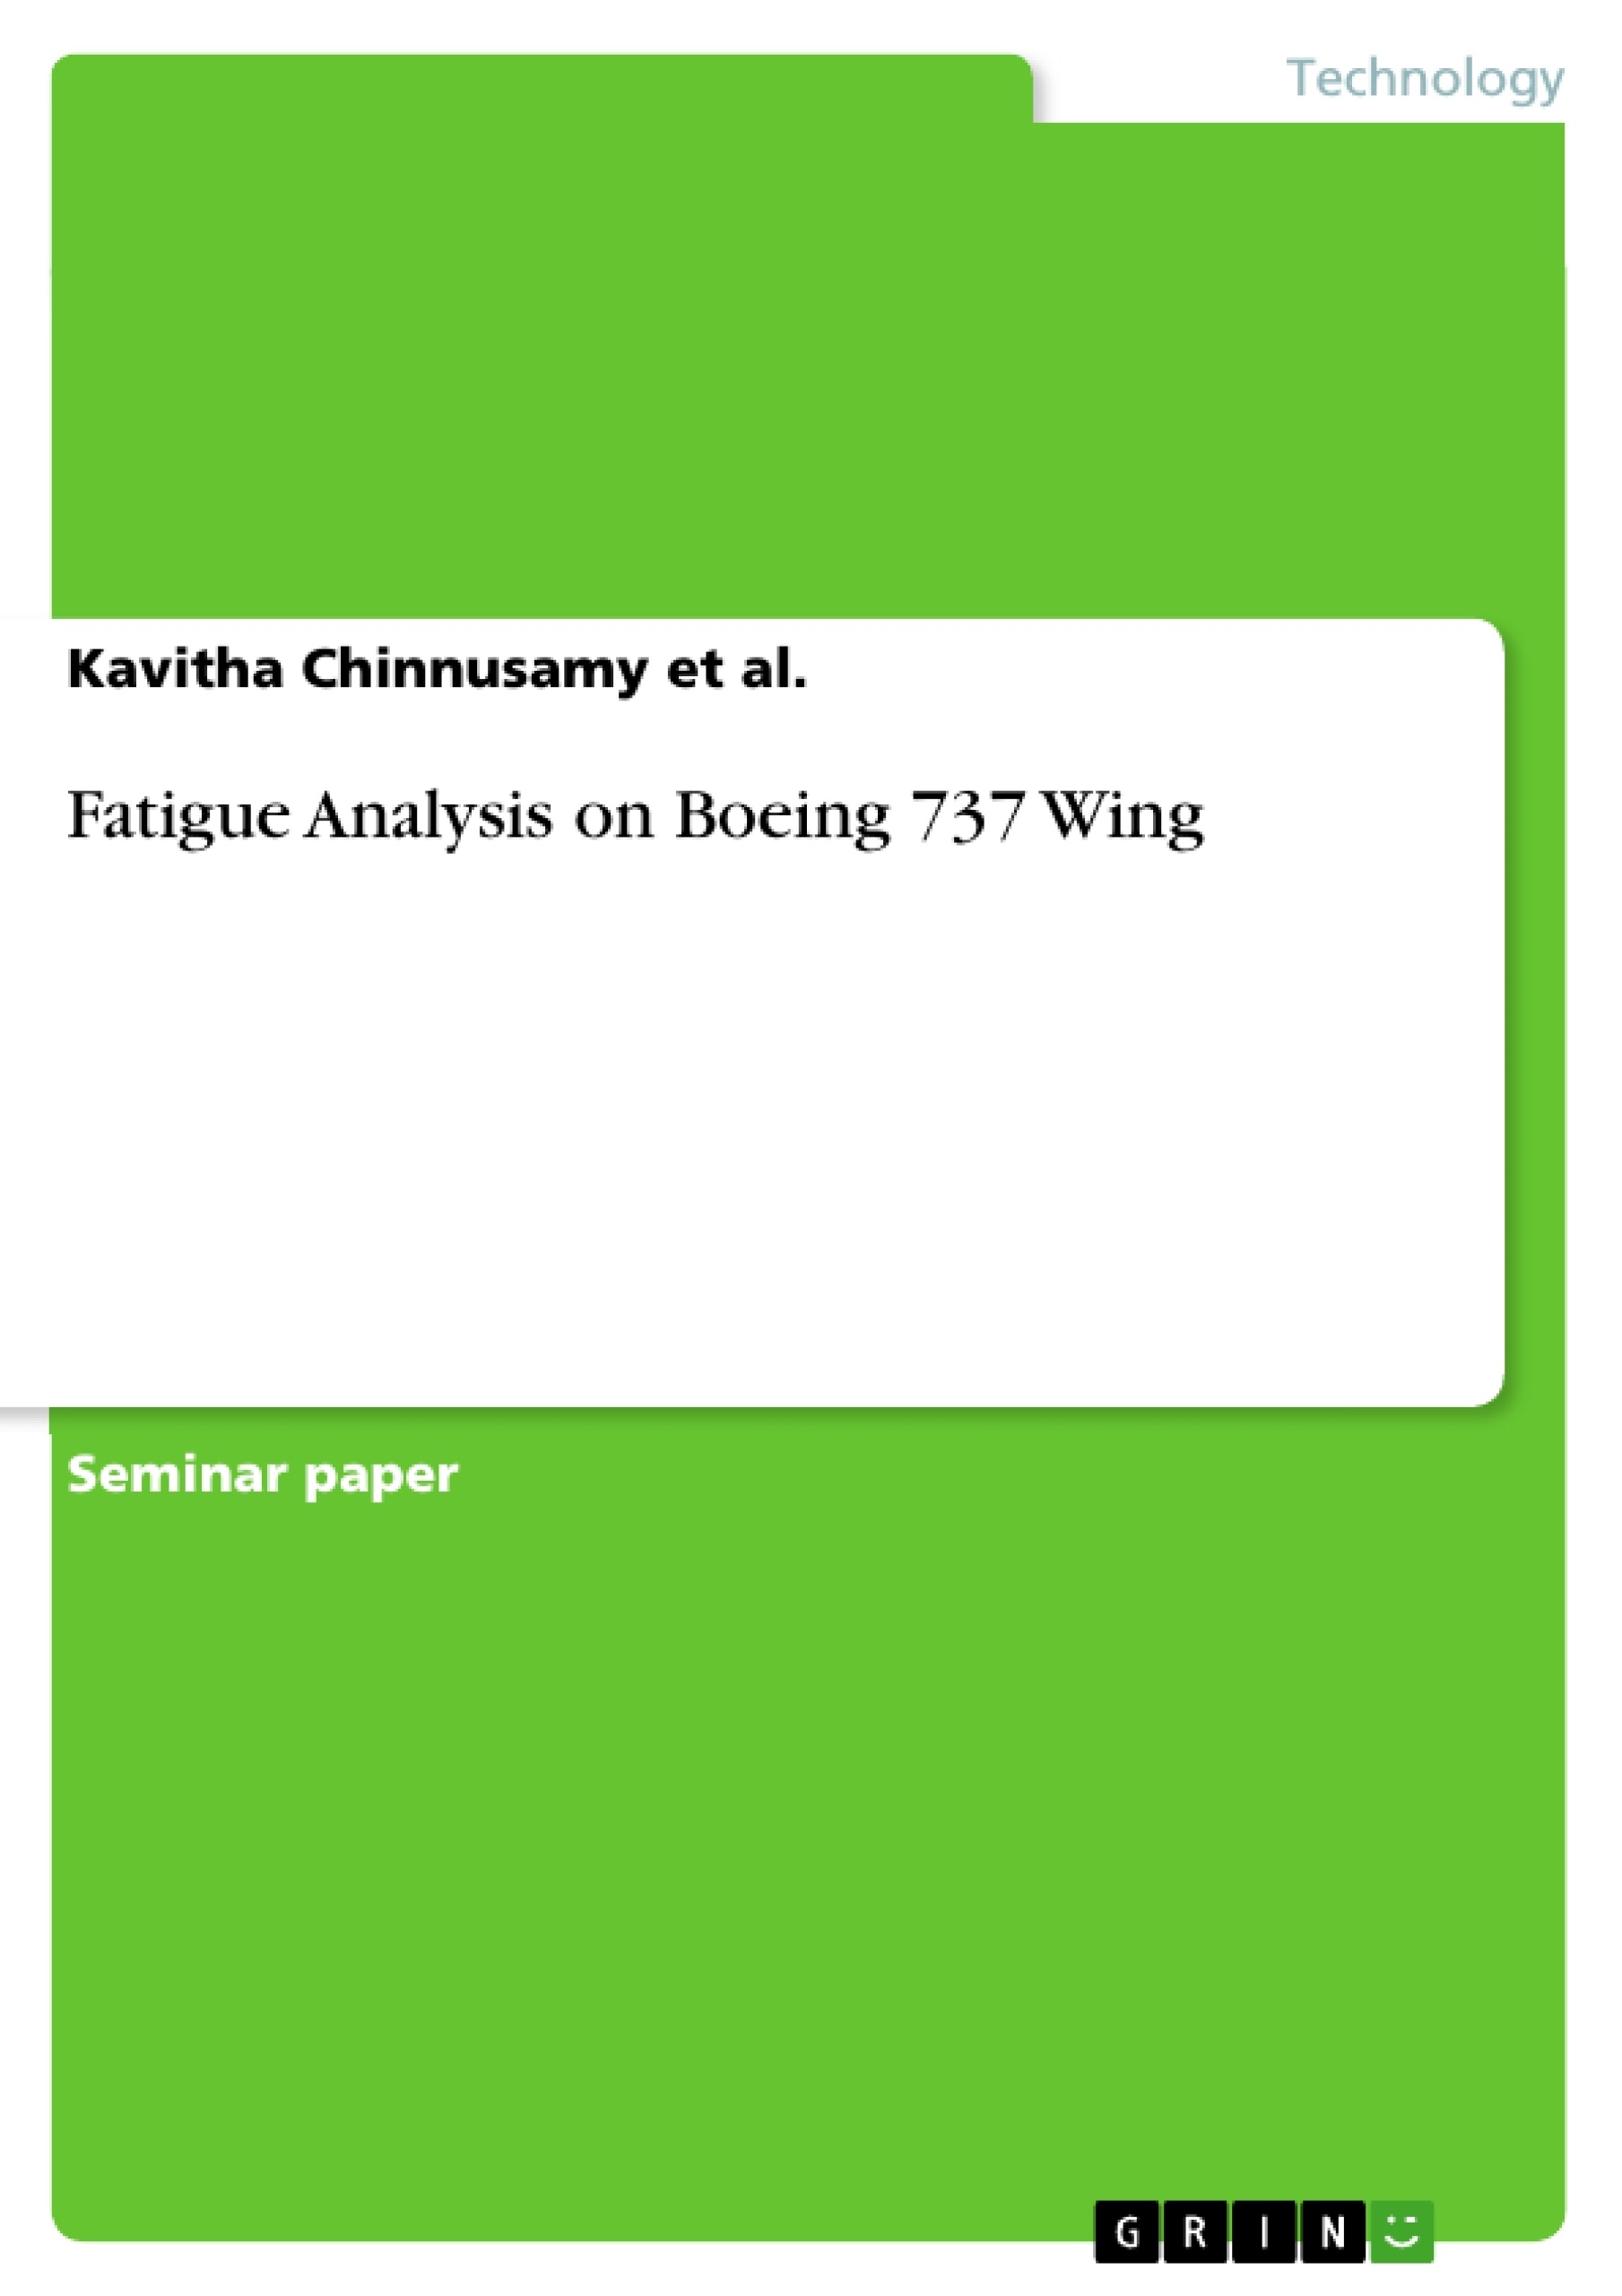 Title: Fatigue Analysis on Boeing 737 Wing